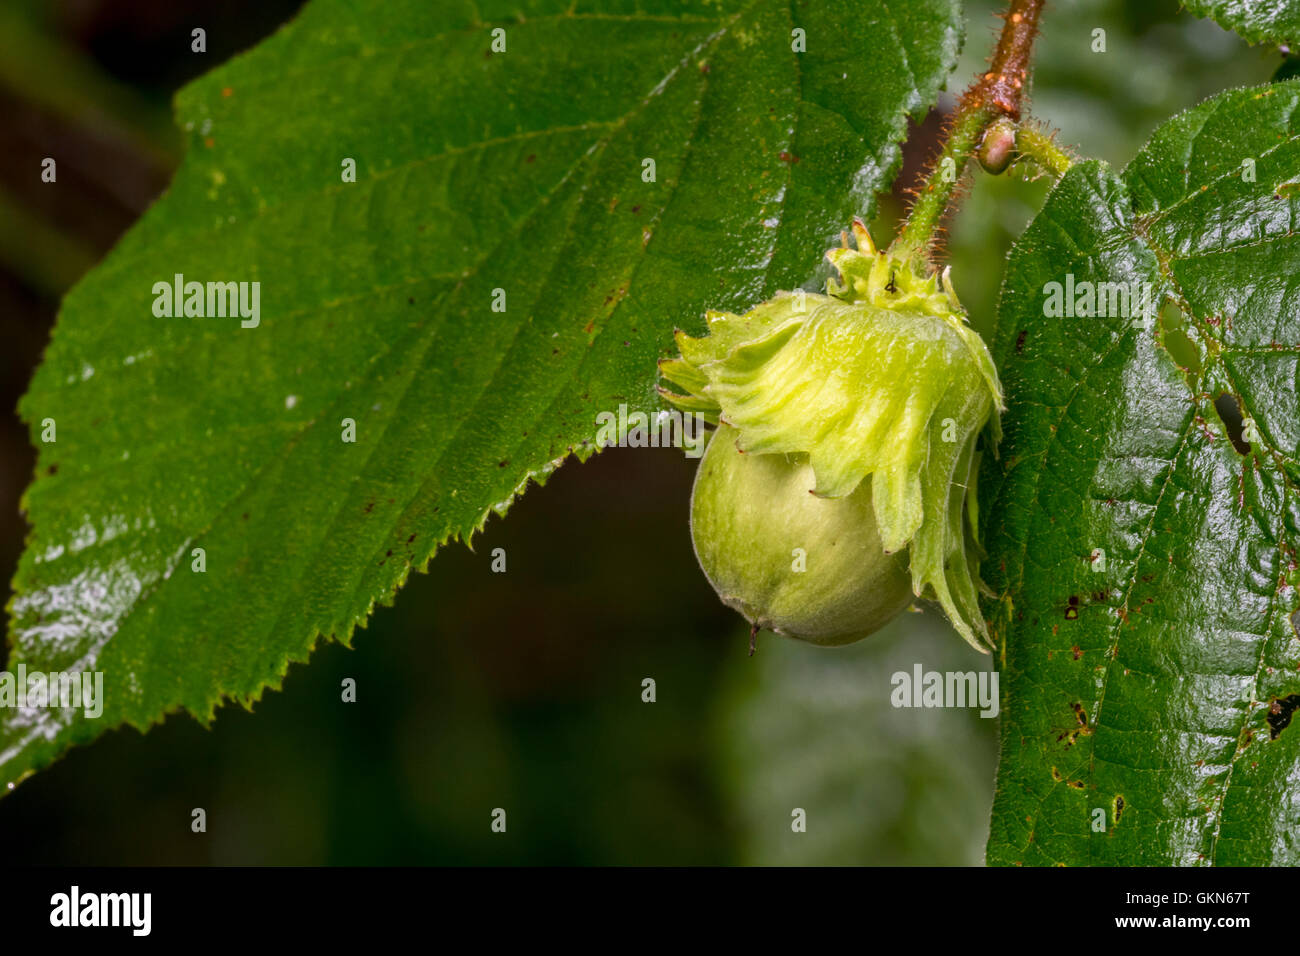 Common hazel (Corylus avellana) close up of leafy involucre / husk and nut in summer Stock Photo